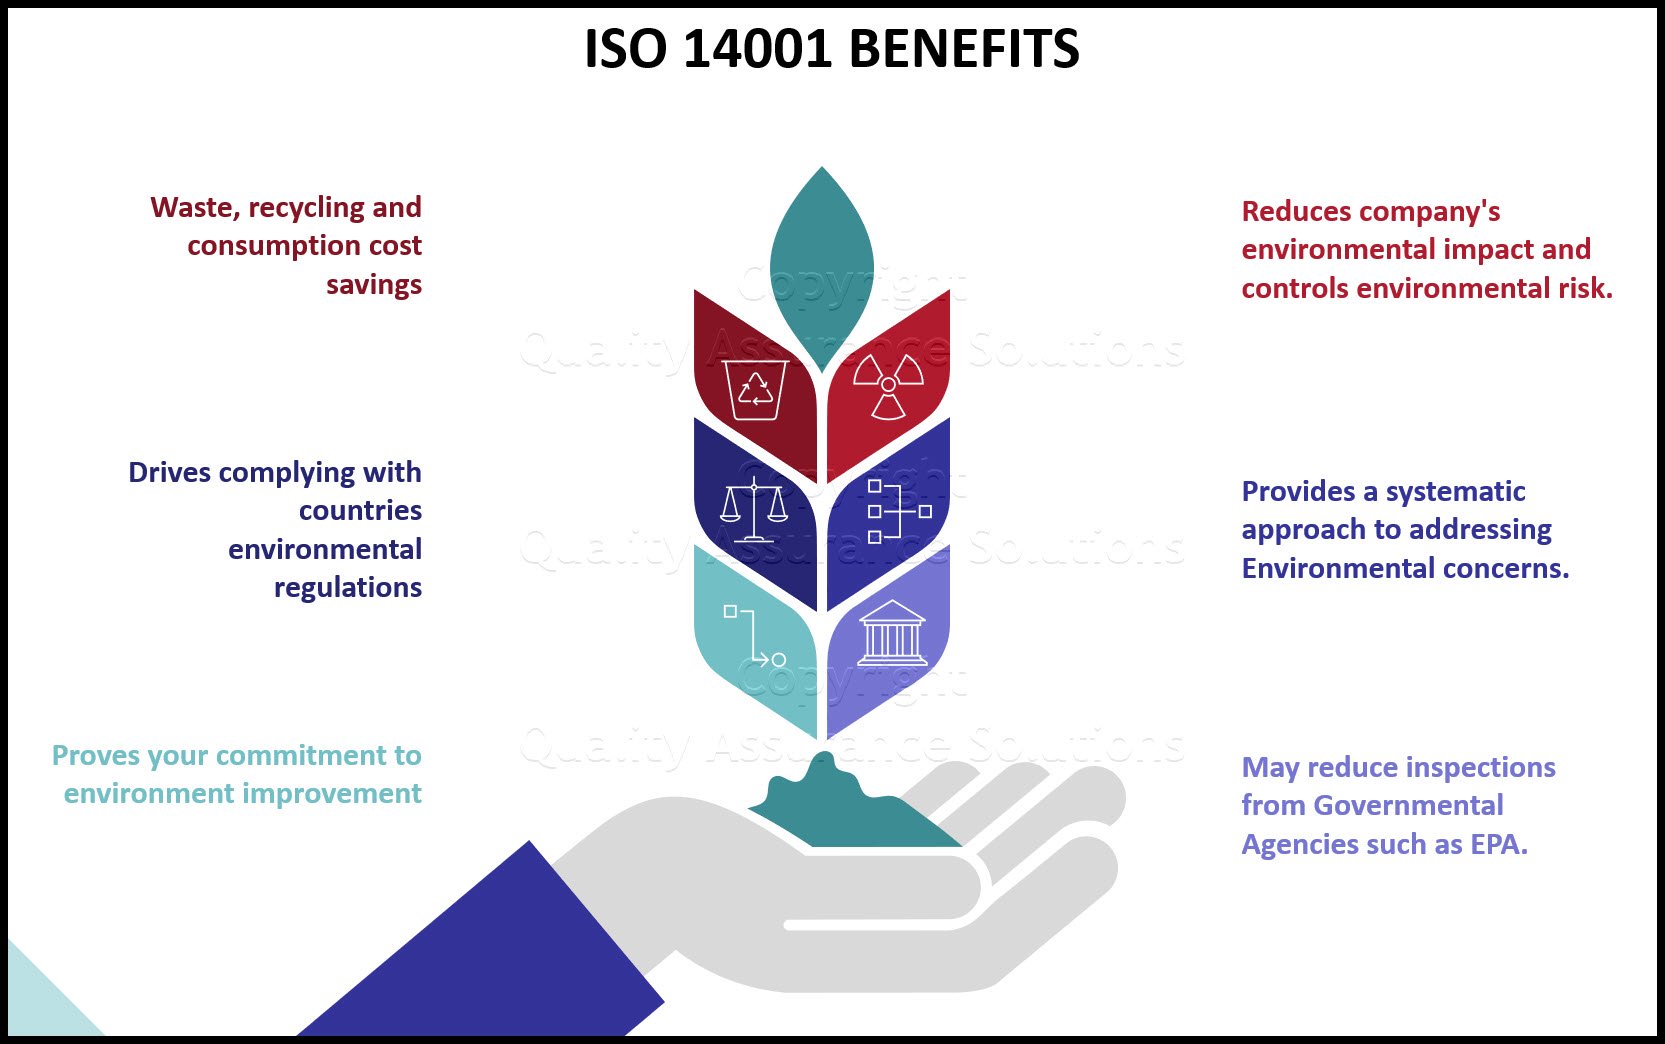 From fighting climate change to reducing process and product costs there are many benefits of ISO 14001